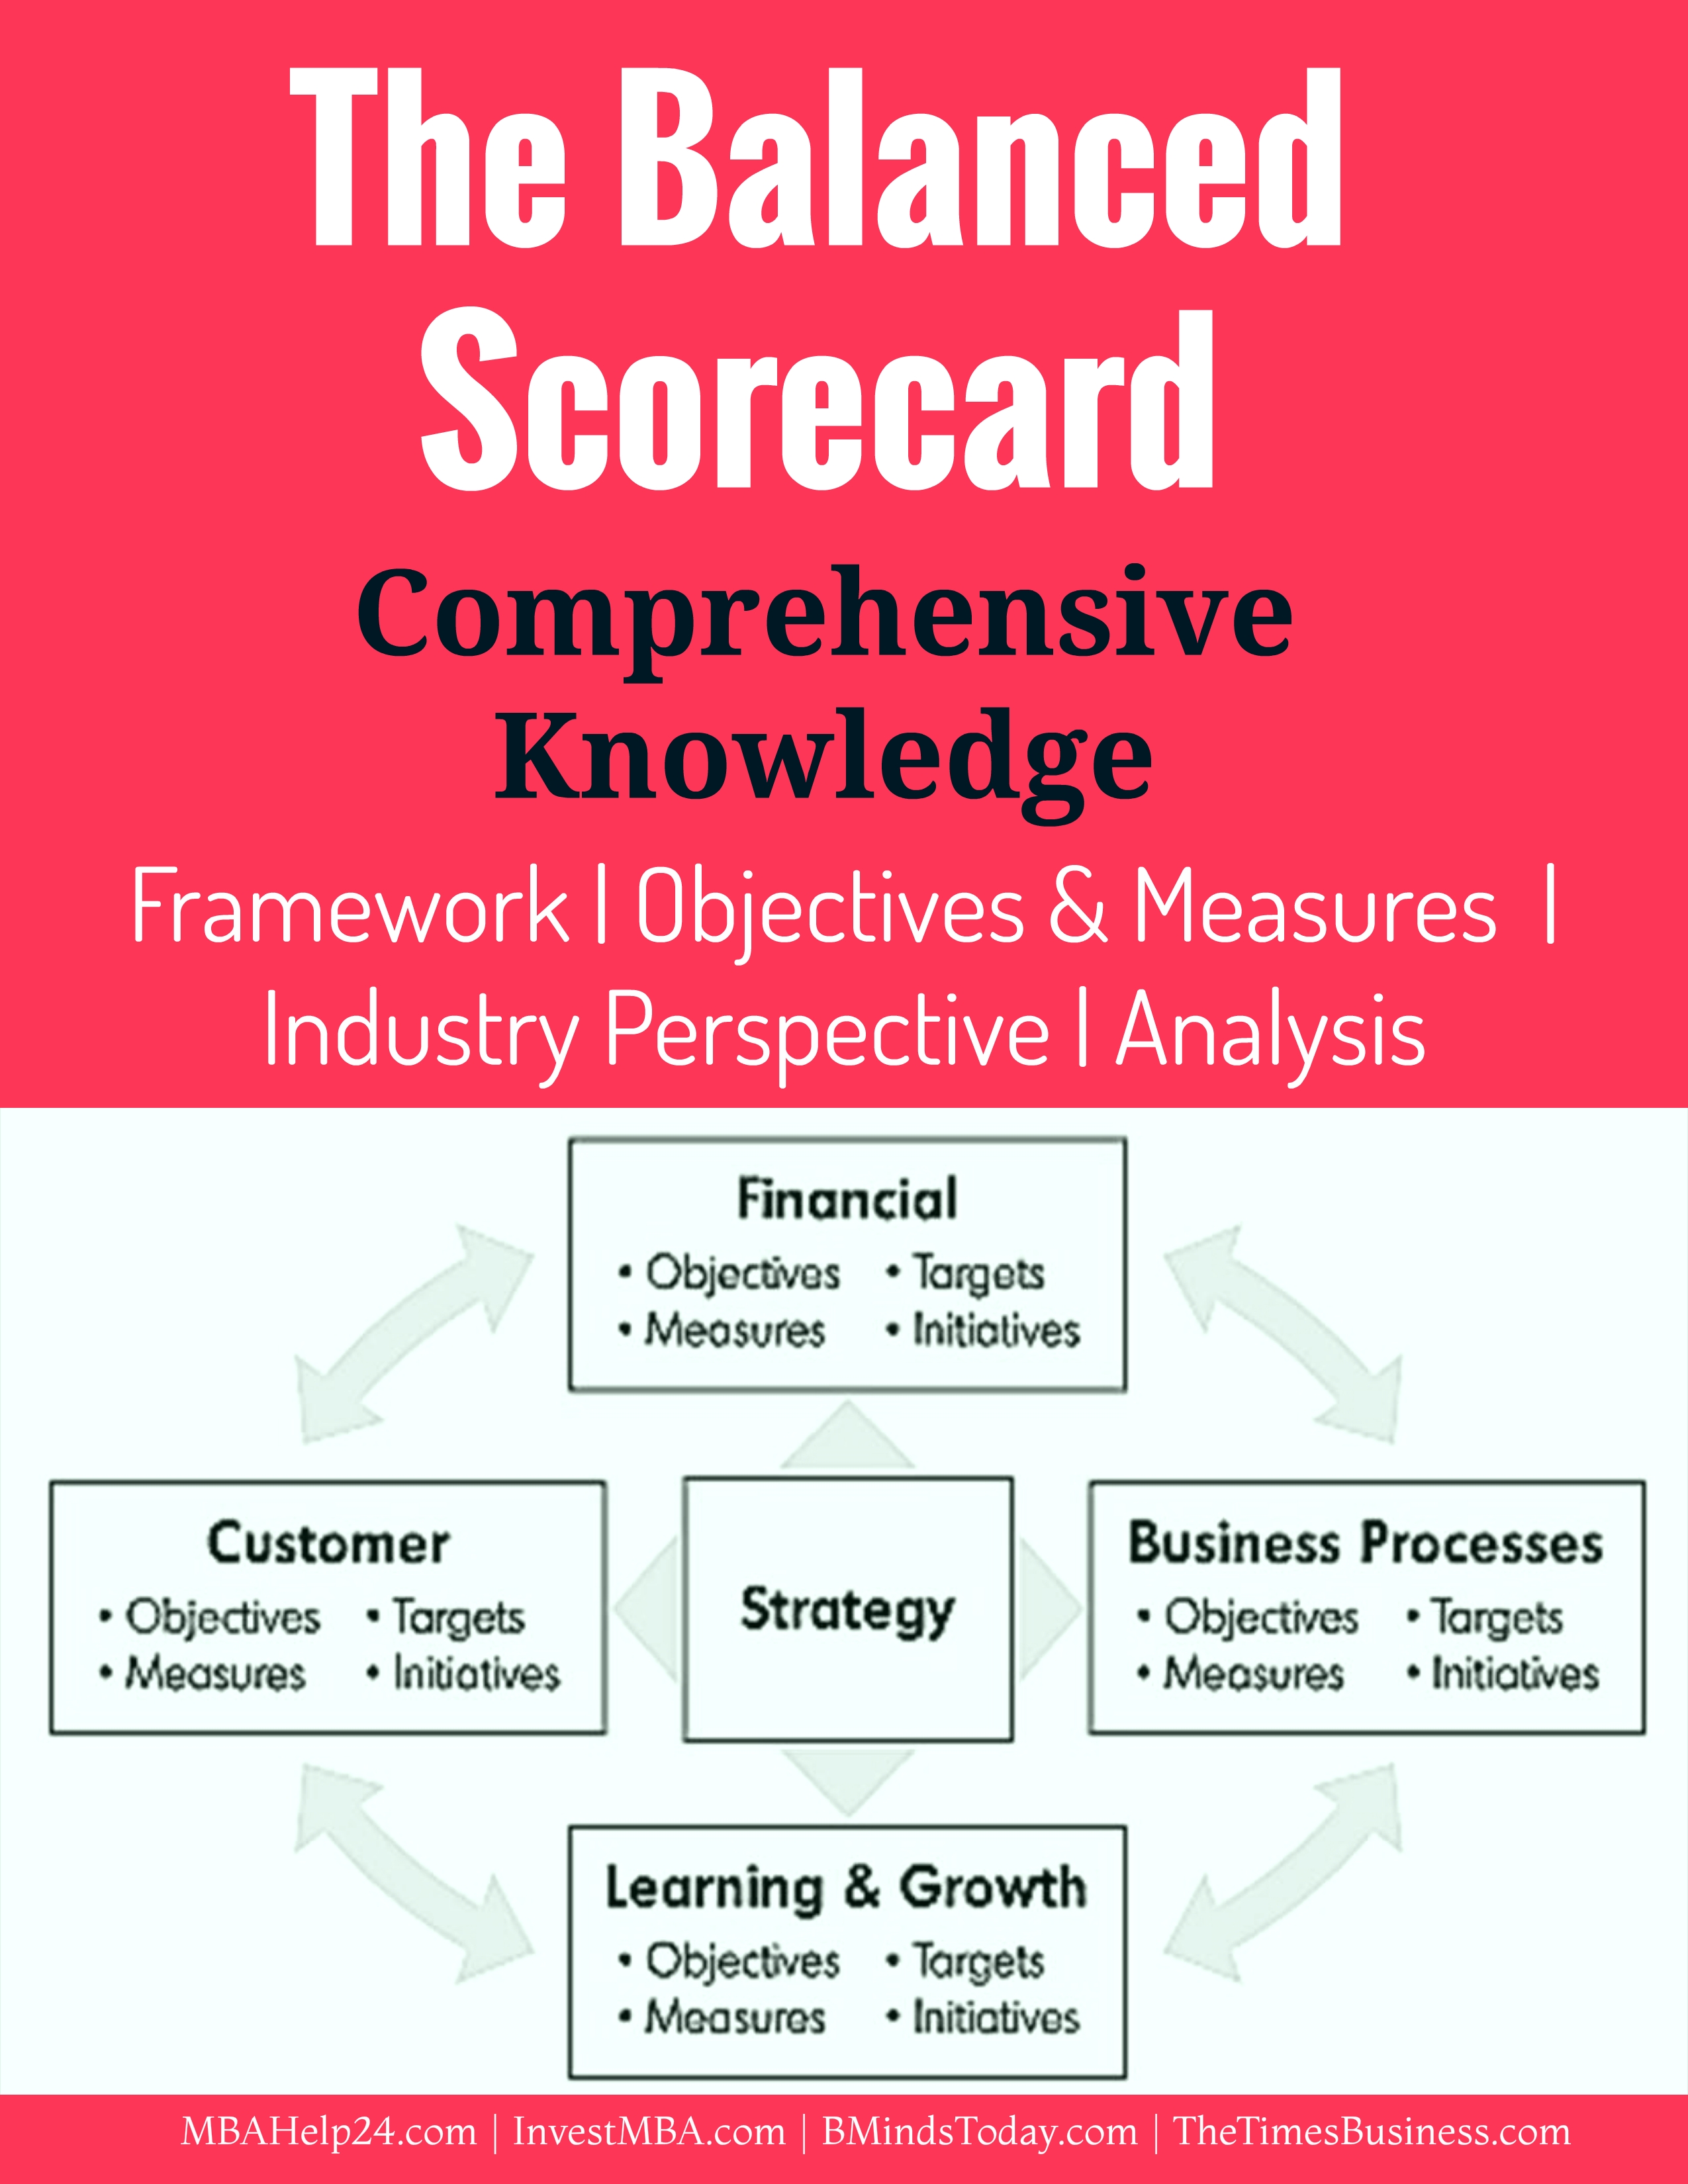 The Balanced Scorecard | Comprehensive Knowledge | Objectives and Measures of Four Perspectives Balanced Scorecard The Balanced Scorecard | Comprehensive Knowledge | Measures | Perspectives The balanced scorecard analysis and framework